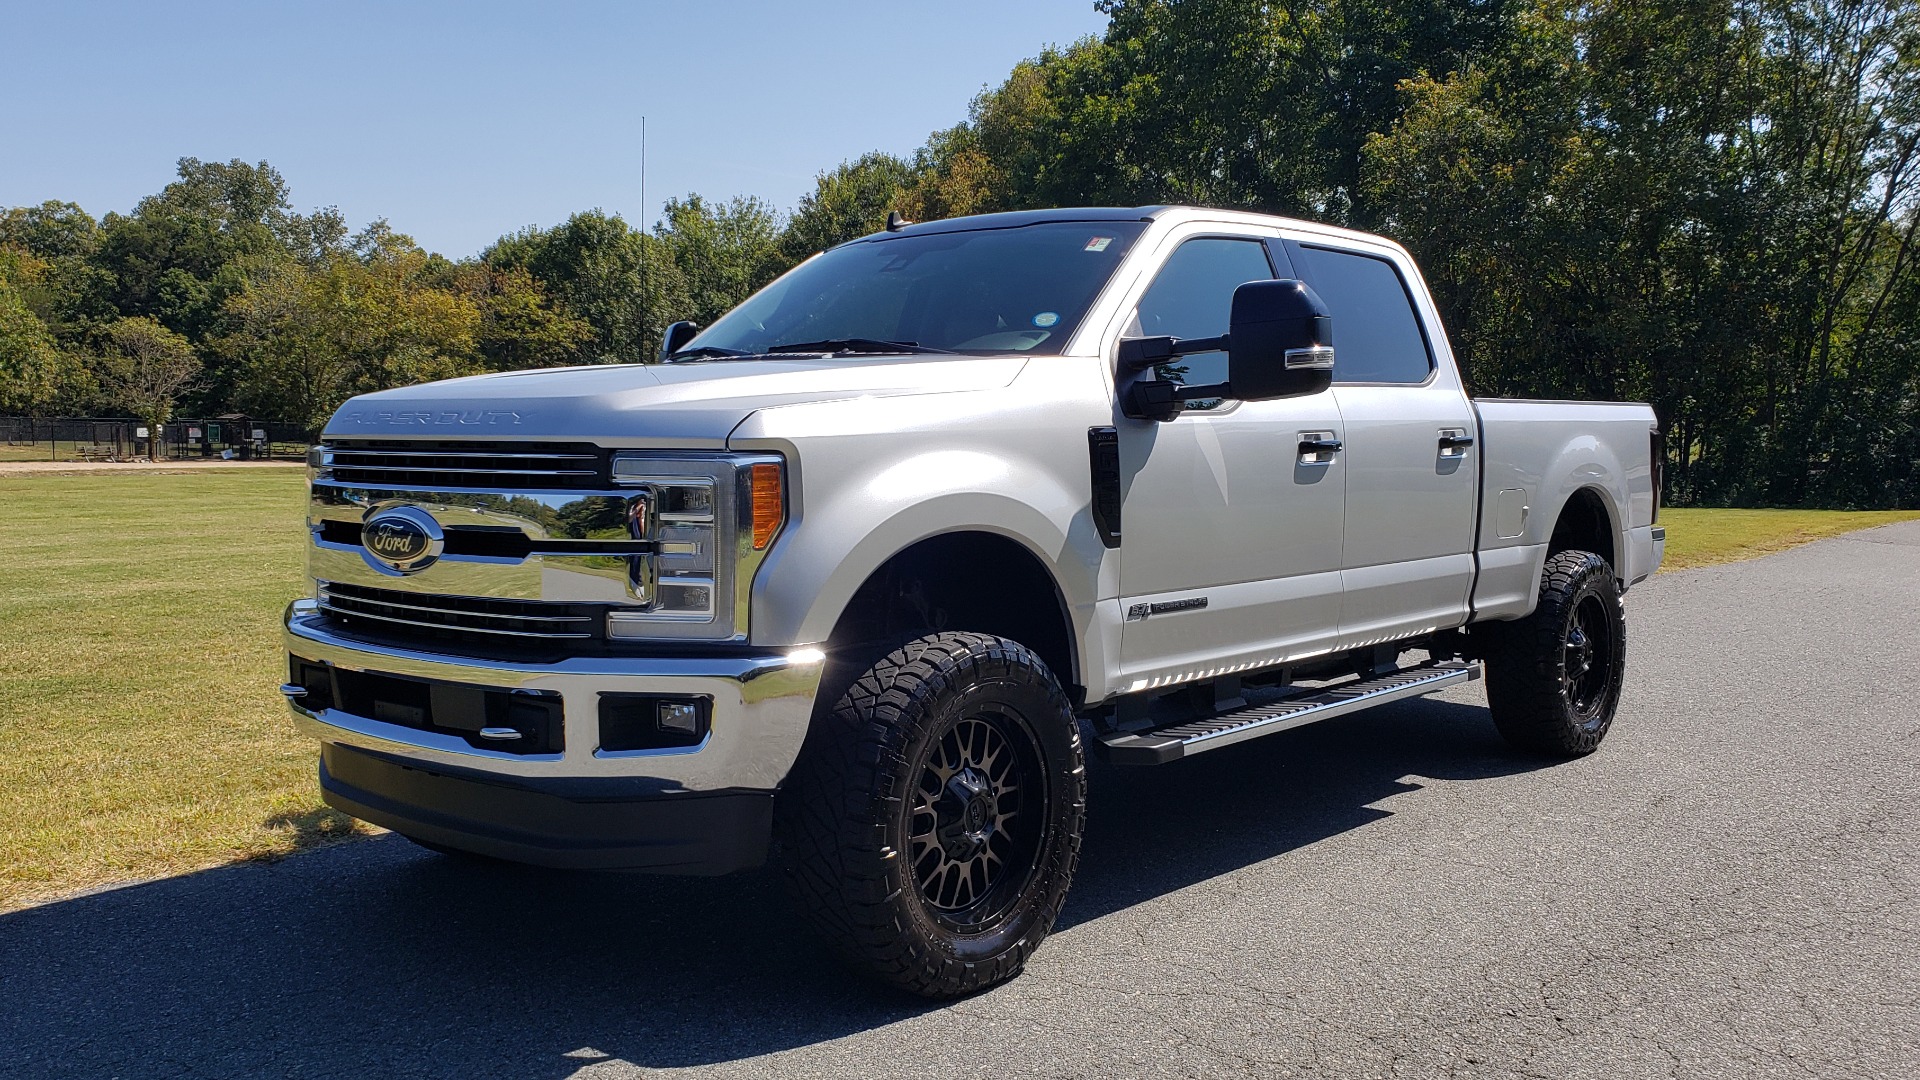 Used 2019 Ford SUPER DUTY F-250 SRW LARIAT 4WD / NAV / PANO-ROOF / B&O SND / REARVIEW / TAILGATE STEP for sale Sold at Formula Imports in Charlotte NC 28227 1